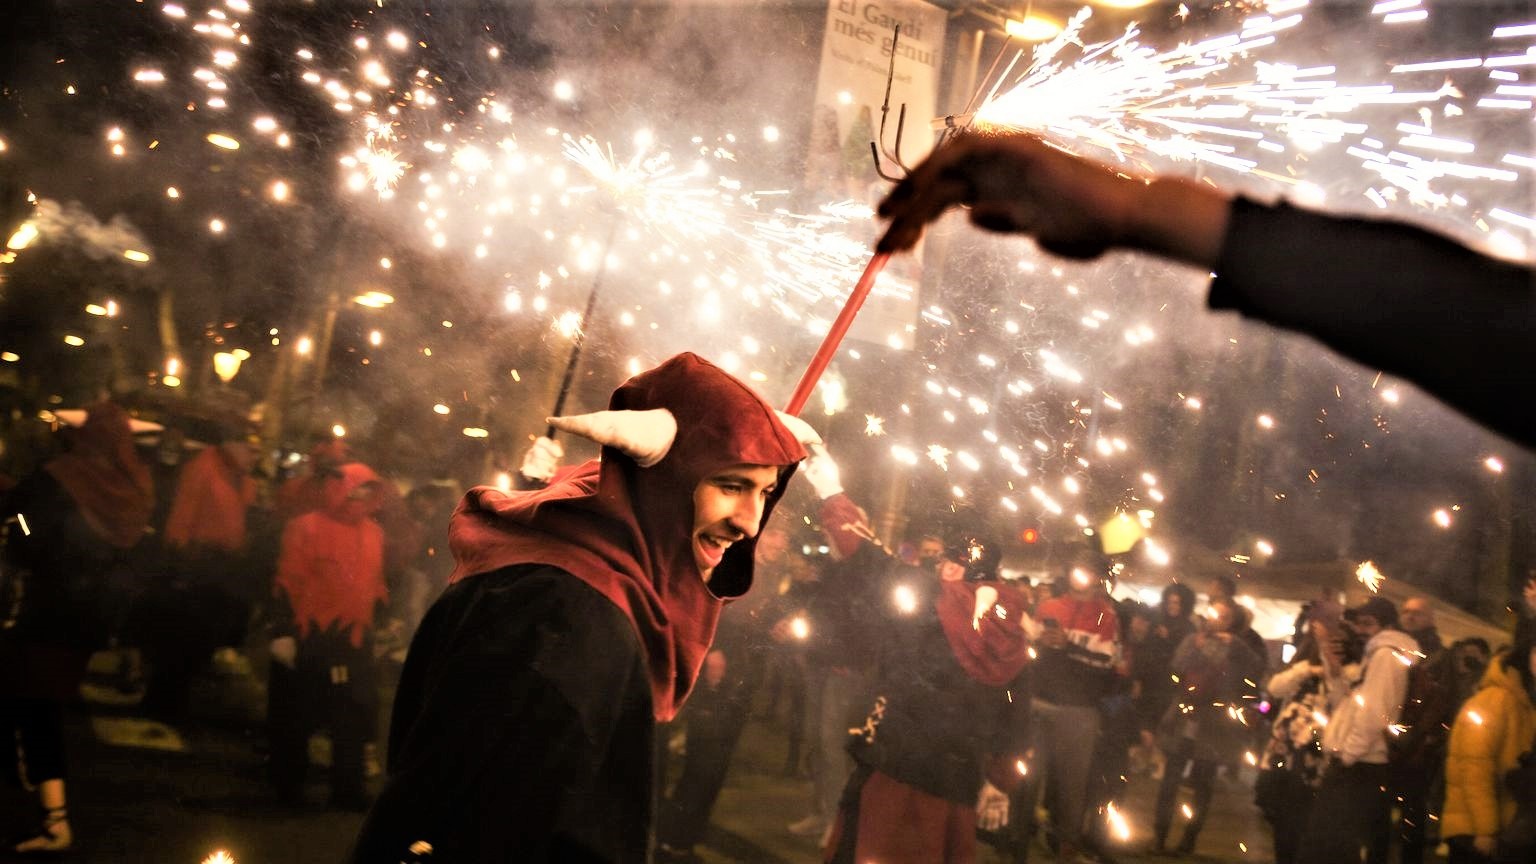 The Catalans strange passion for firecrackers